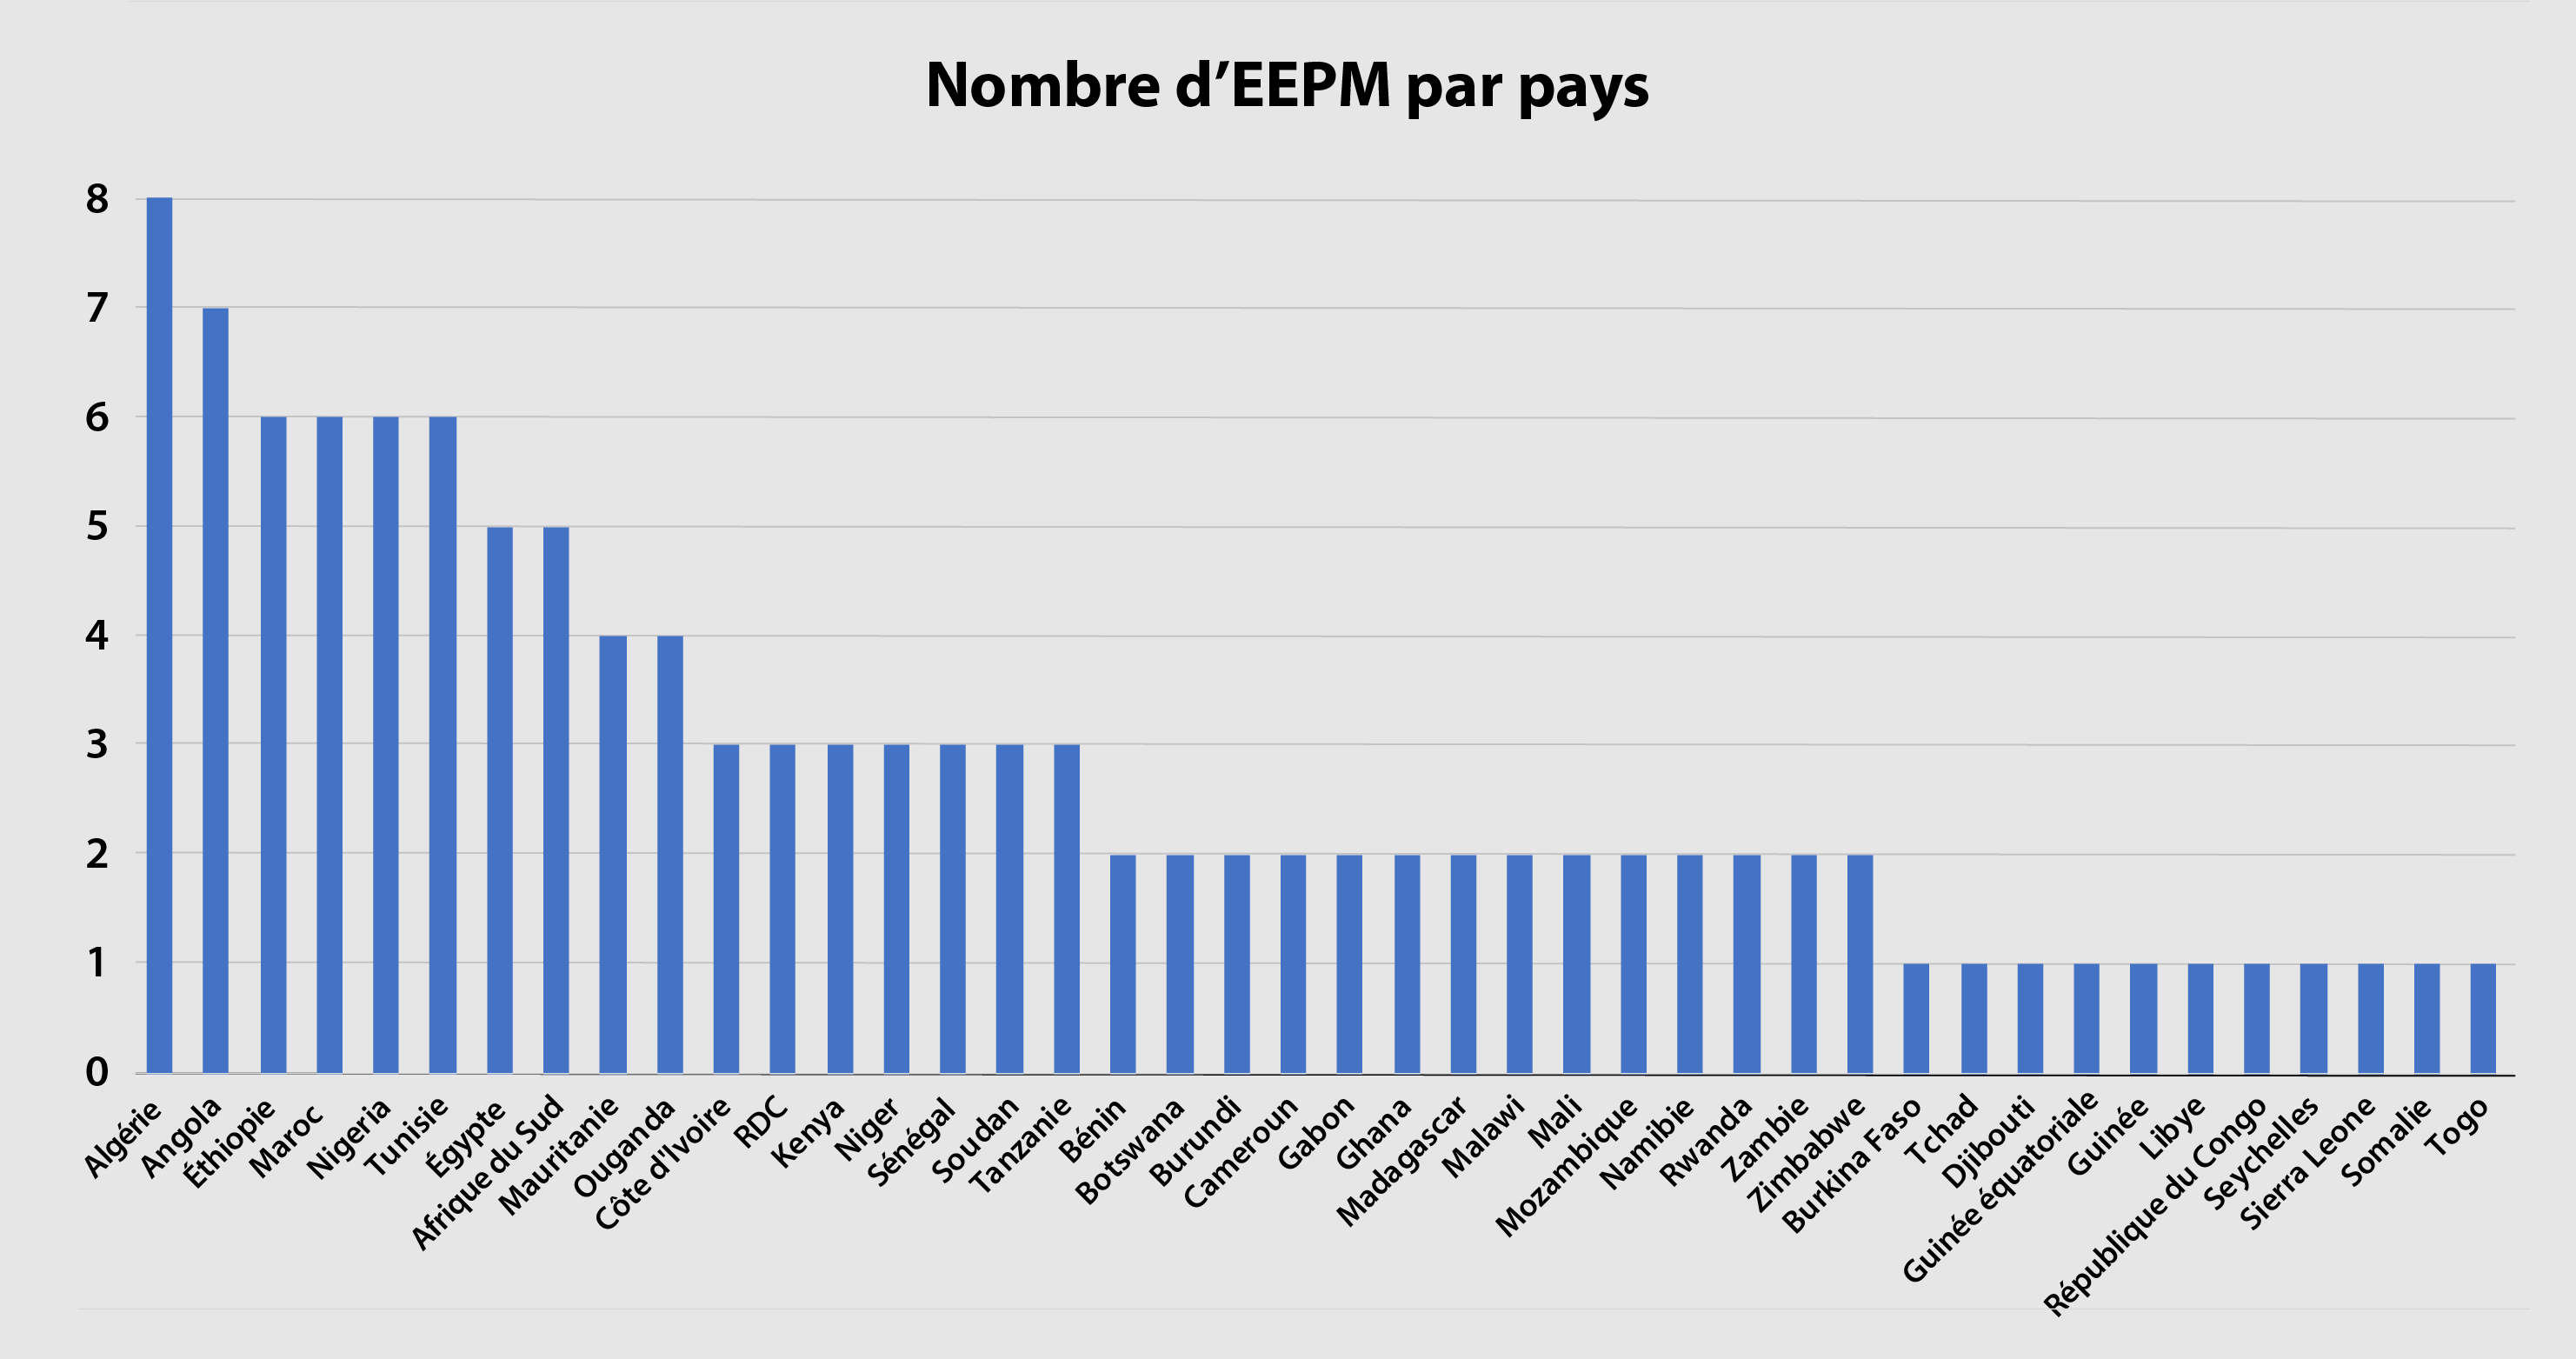 PMEs by country